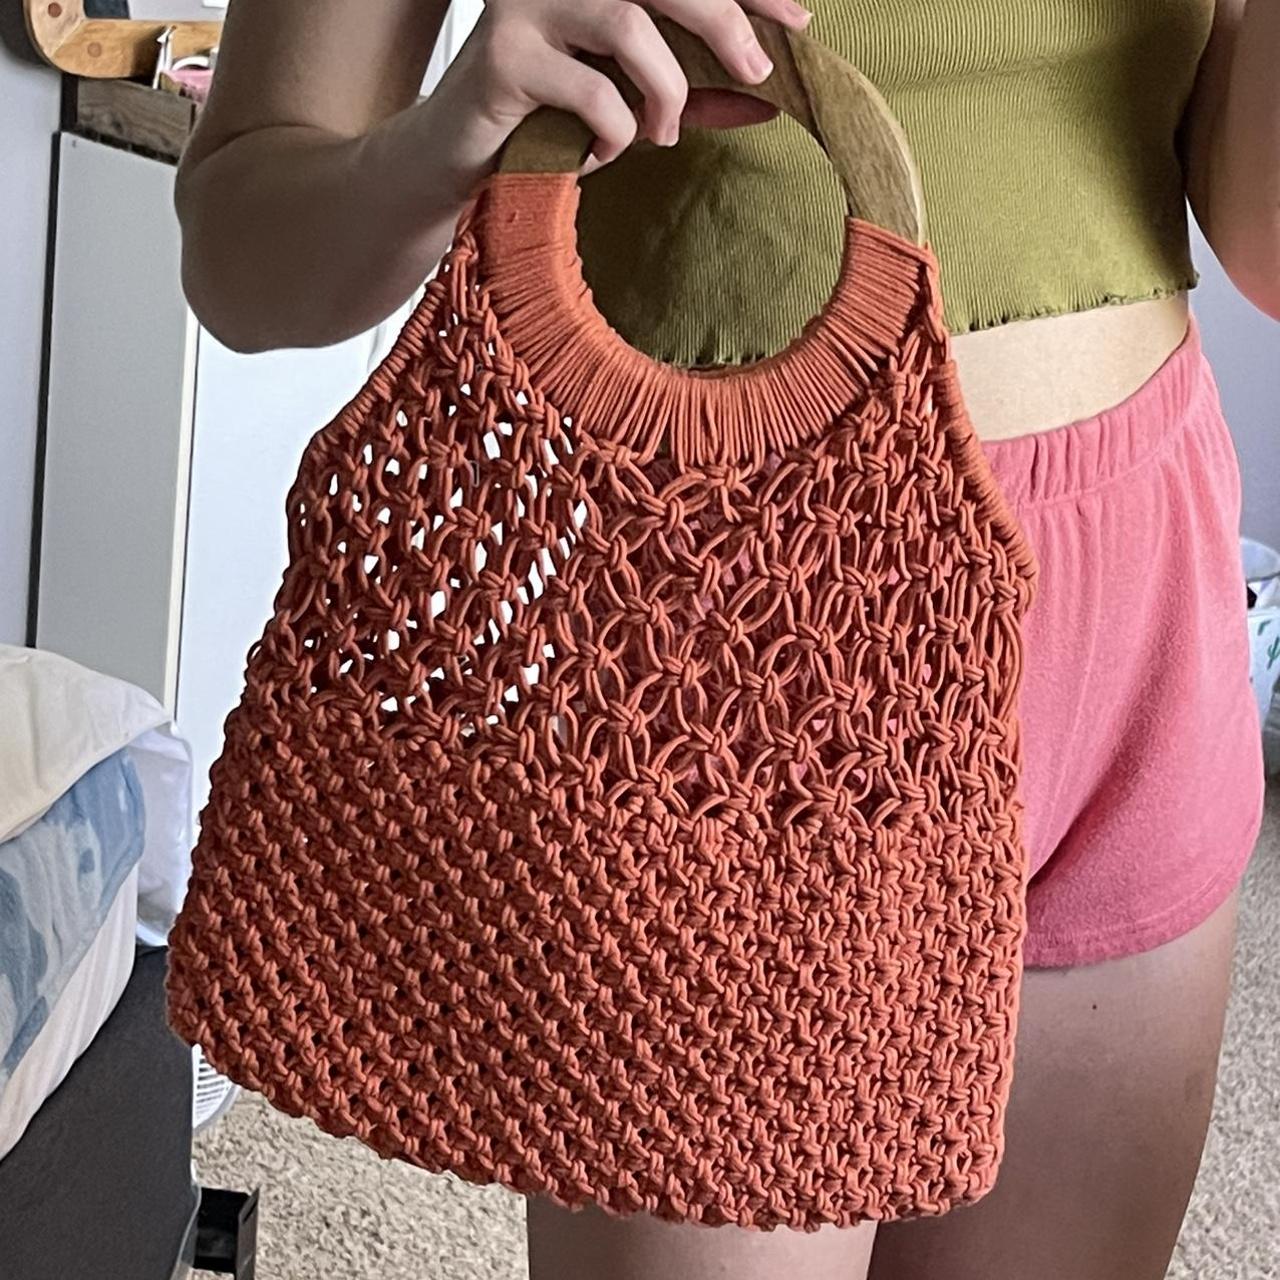 Rectangular Cotton Crochet Tote with Leather Handles - Scents & Feel